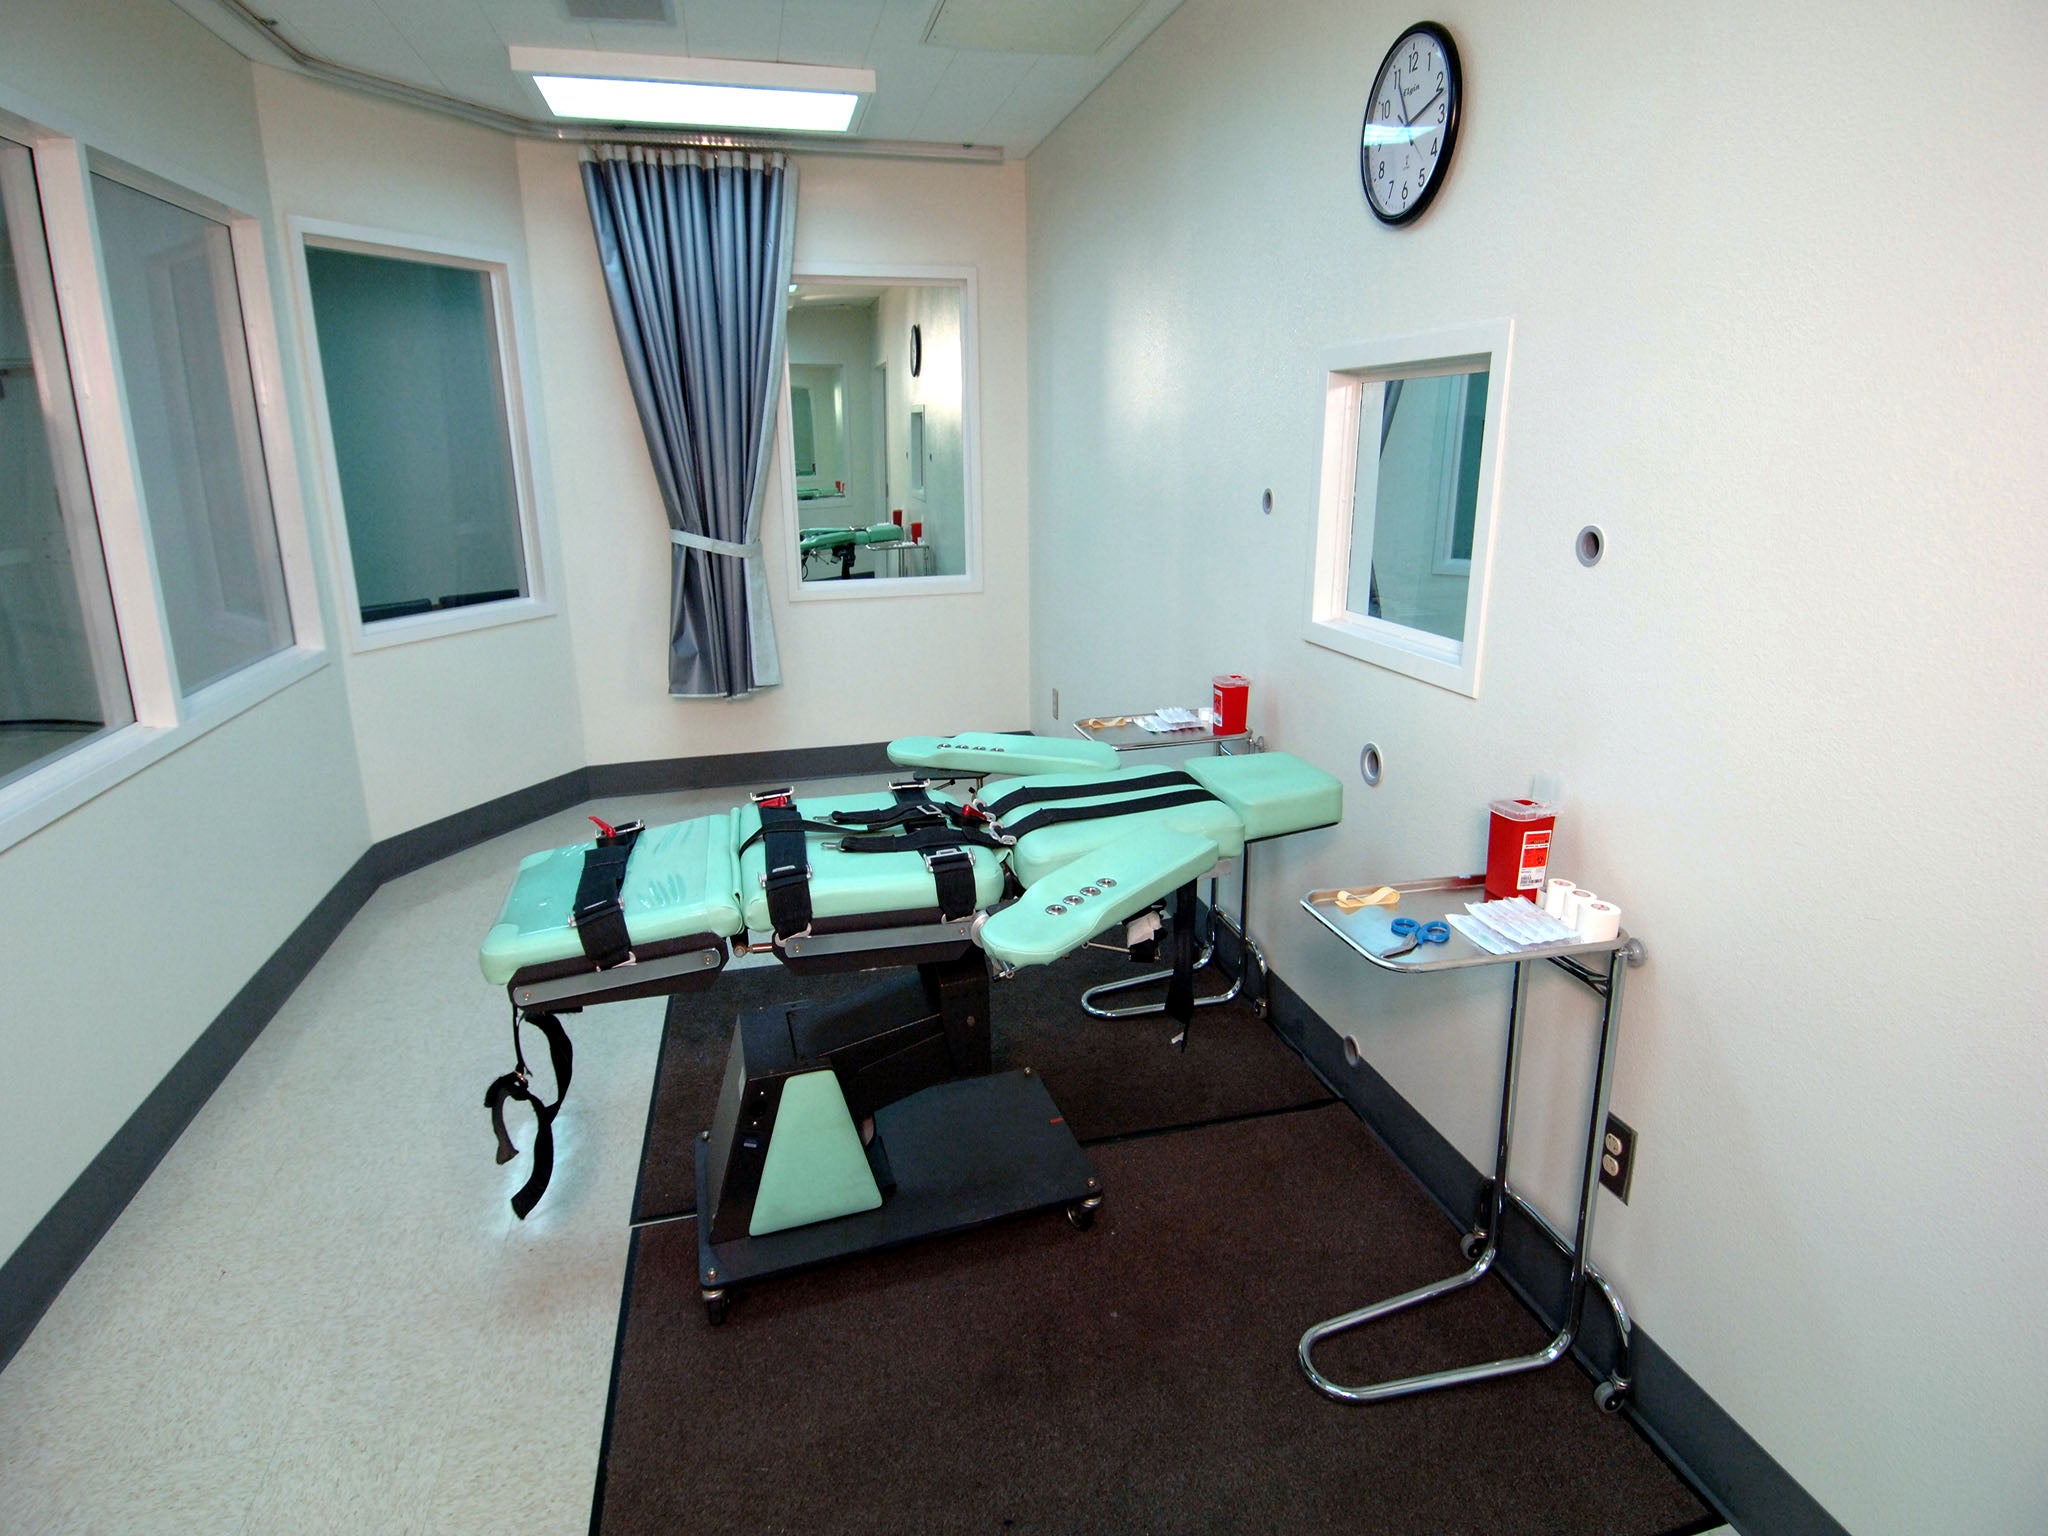 The US Supreme Court could delay executions ahead of its decision on lethal injections.